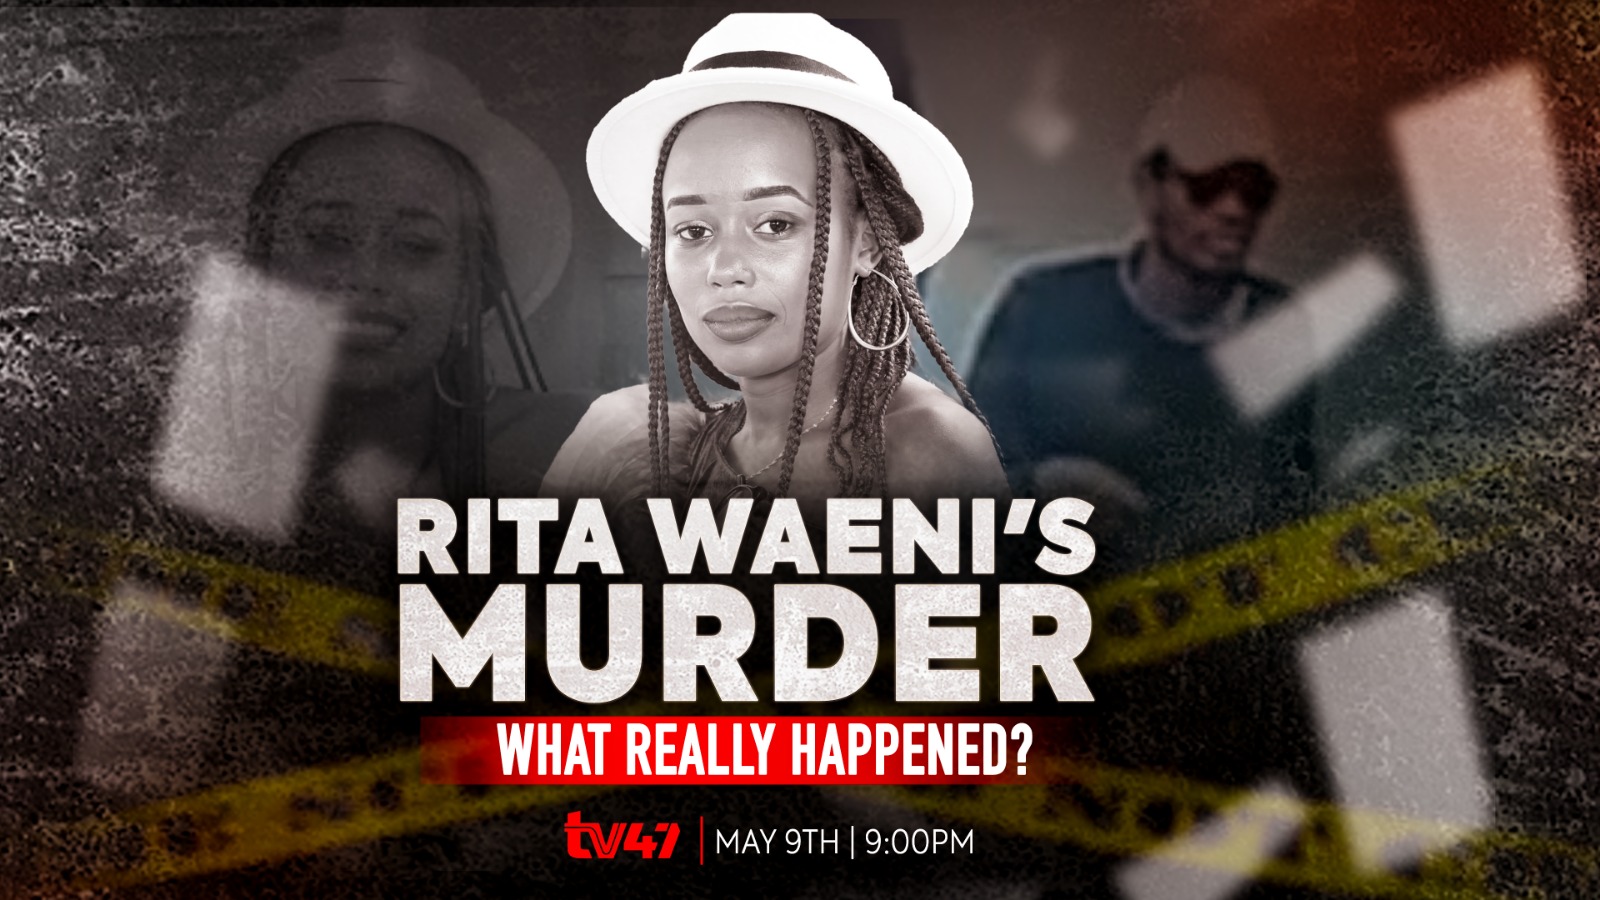 Rita Waeni Murder | Mysterious call from friend, confessions: Parents reveal intricate details | PART 1